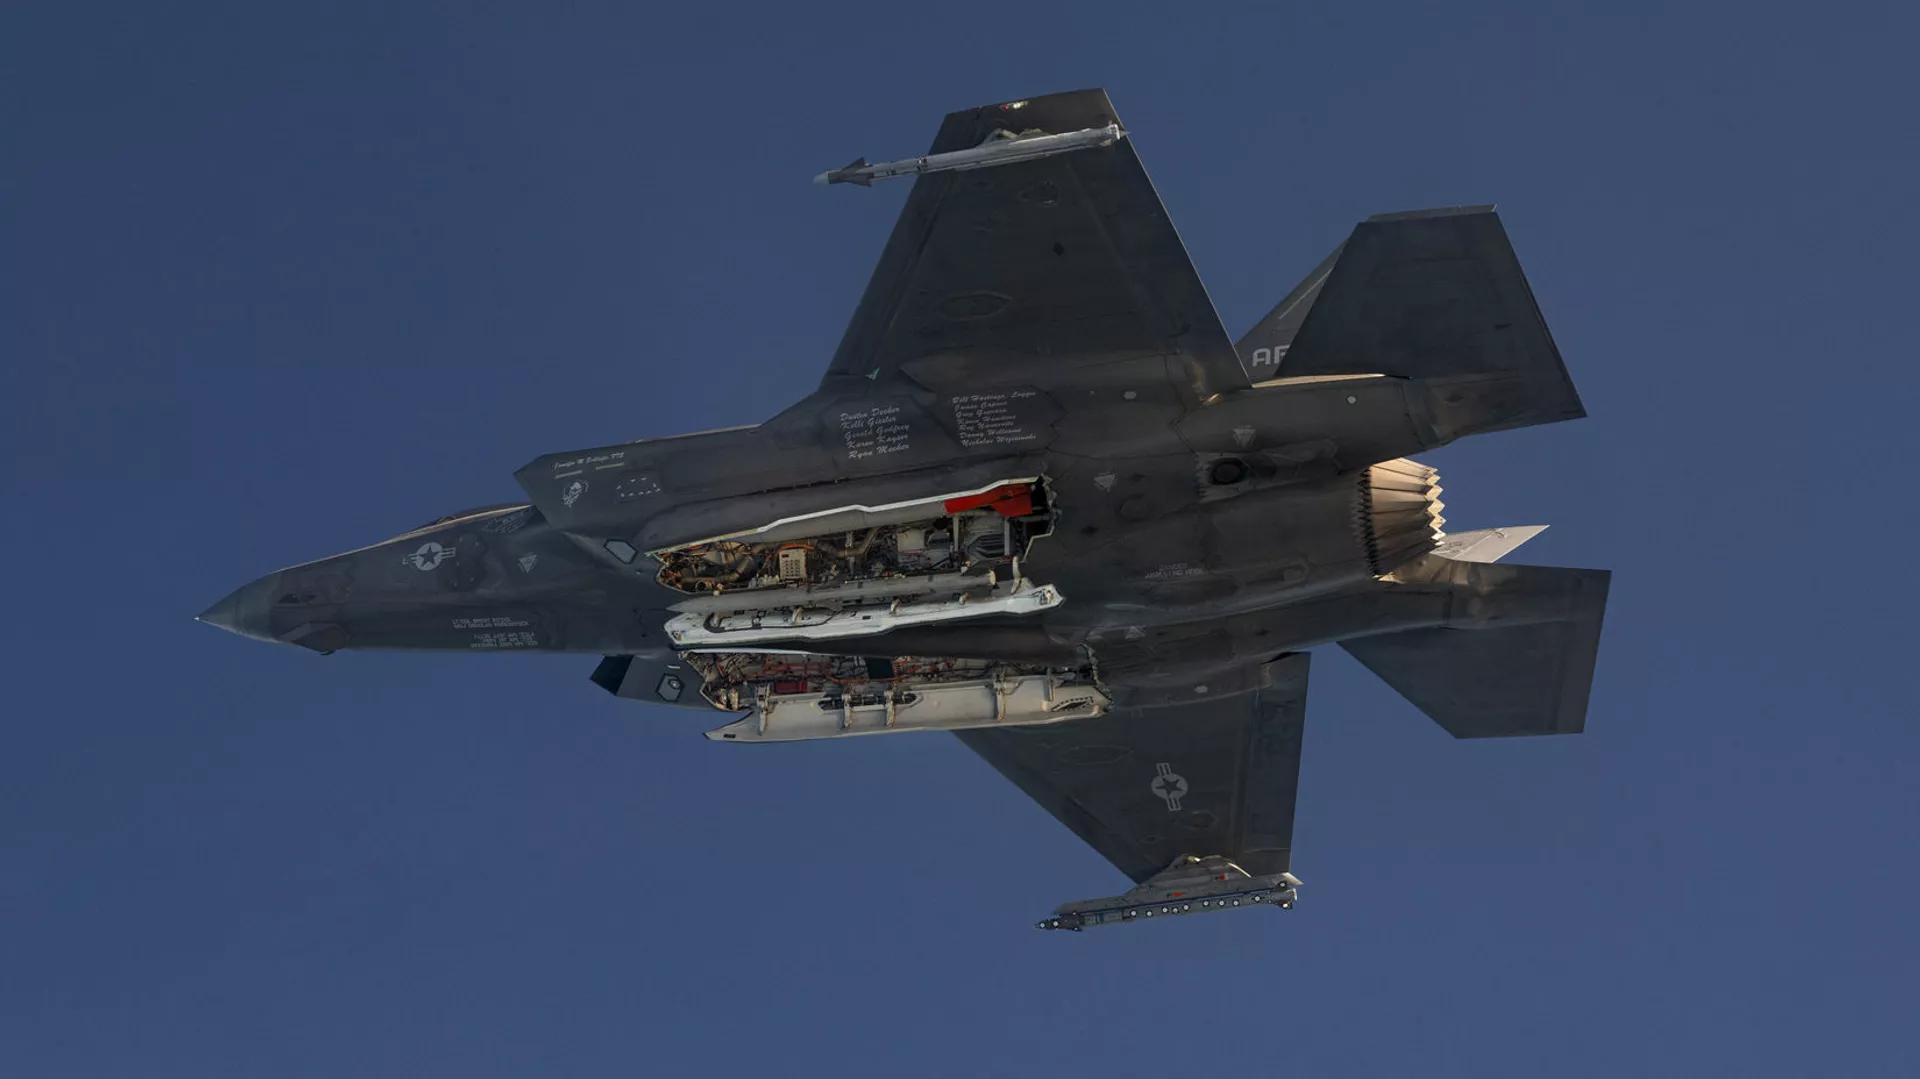 Almost Half of US’ F-35 Fleet Not Capable of Flying at Any Time – Watchdog